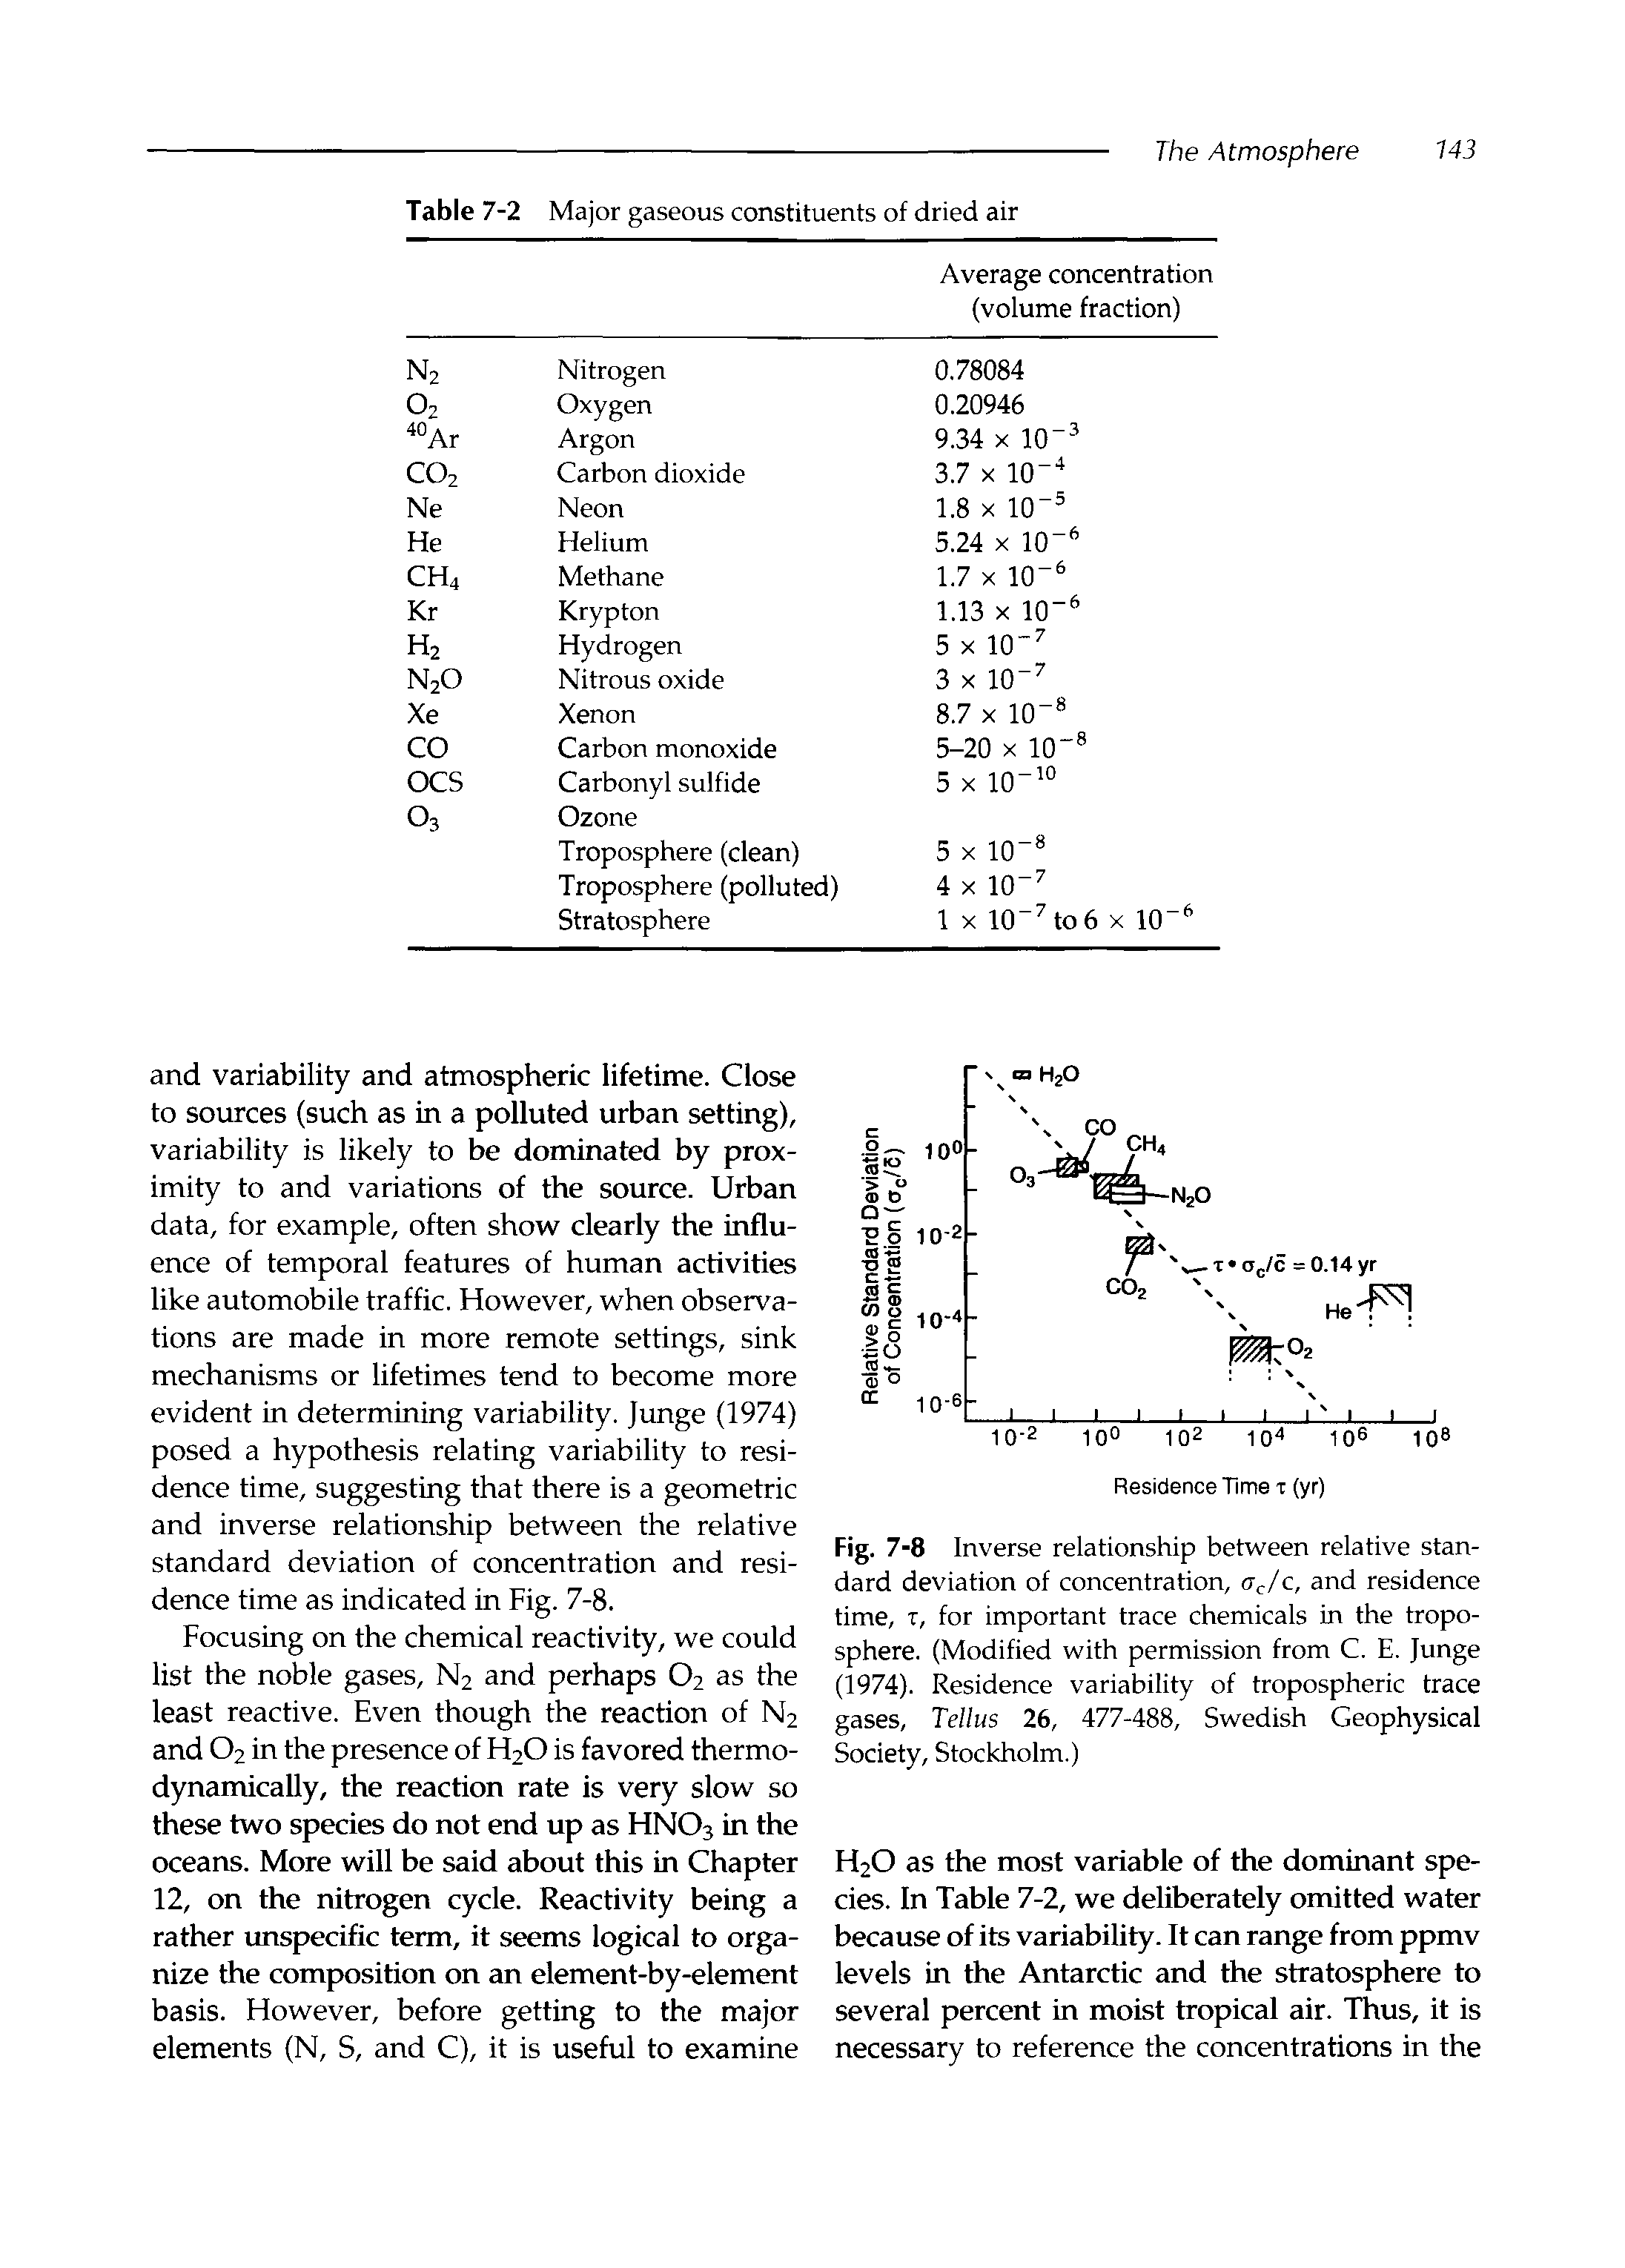 Fig. 7-8 Inverse relationship between relative standard deviation of concentration, a /c, and residence time, T, for important trace chemicals in the troposphere. (Modified with permission from C. E. Junge (1974). Residence variability of tropospheric trace gases, Tellus 26, 477-488, Swedish Geophysical Society, Stockholm.)...